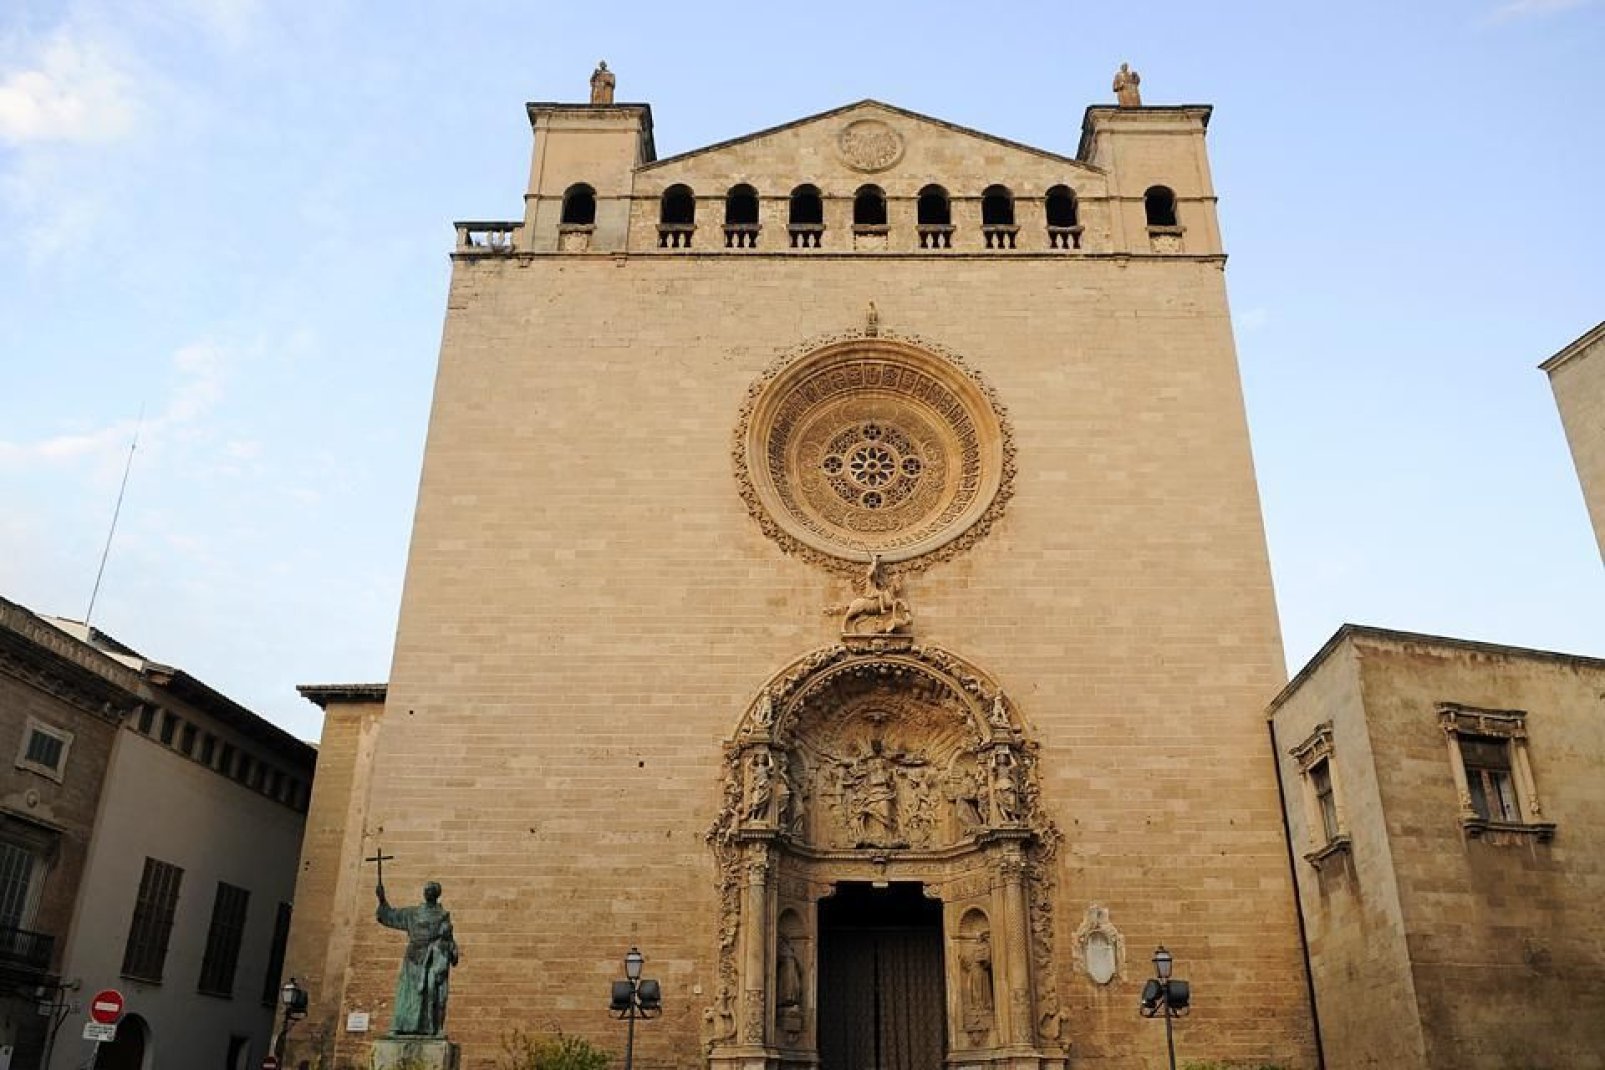 Since the Middle Ages, a whole host of architectural styles has left its mark on the cathedral.